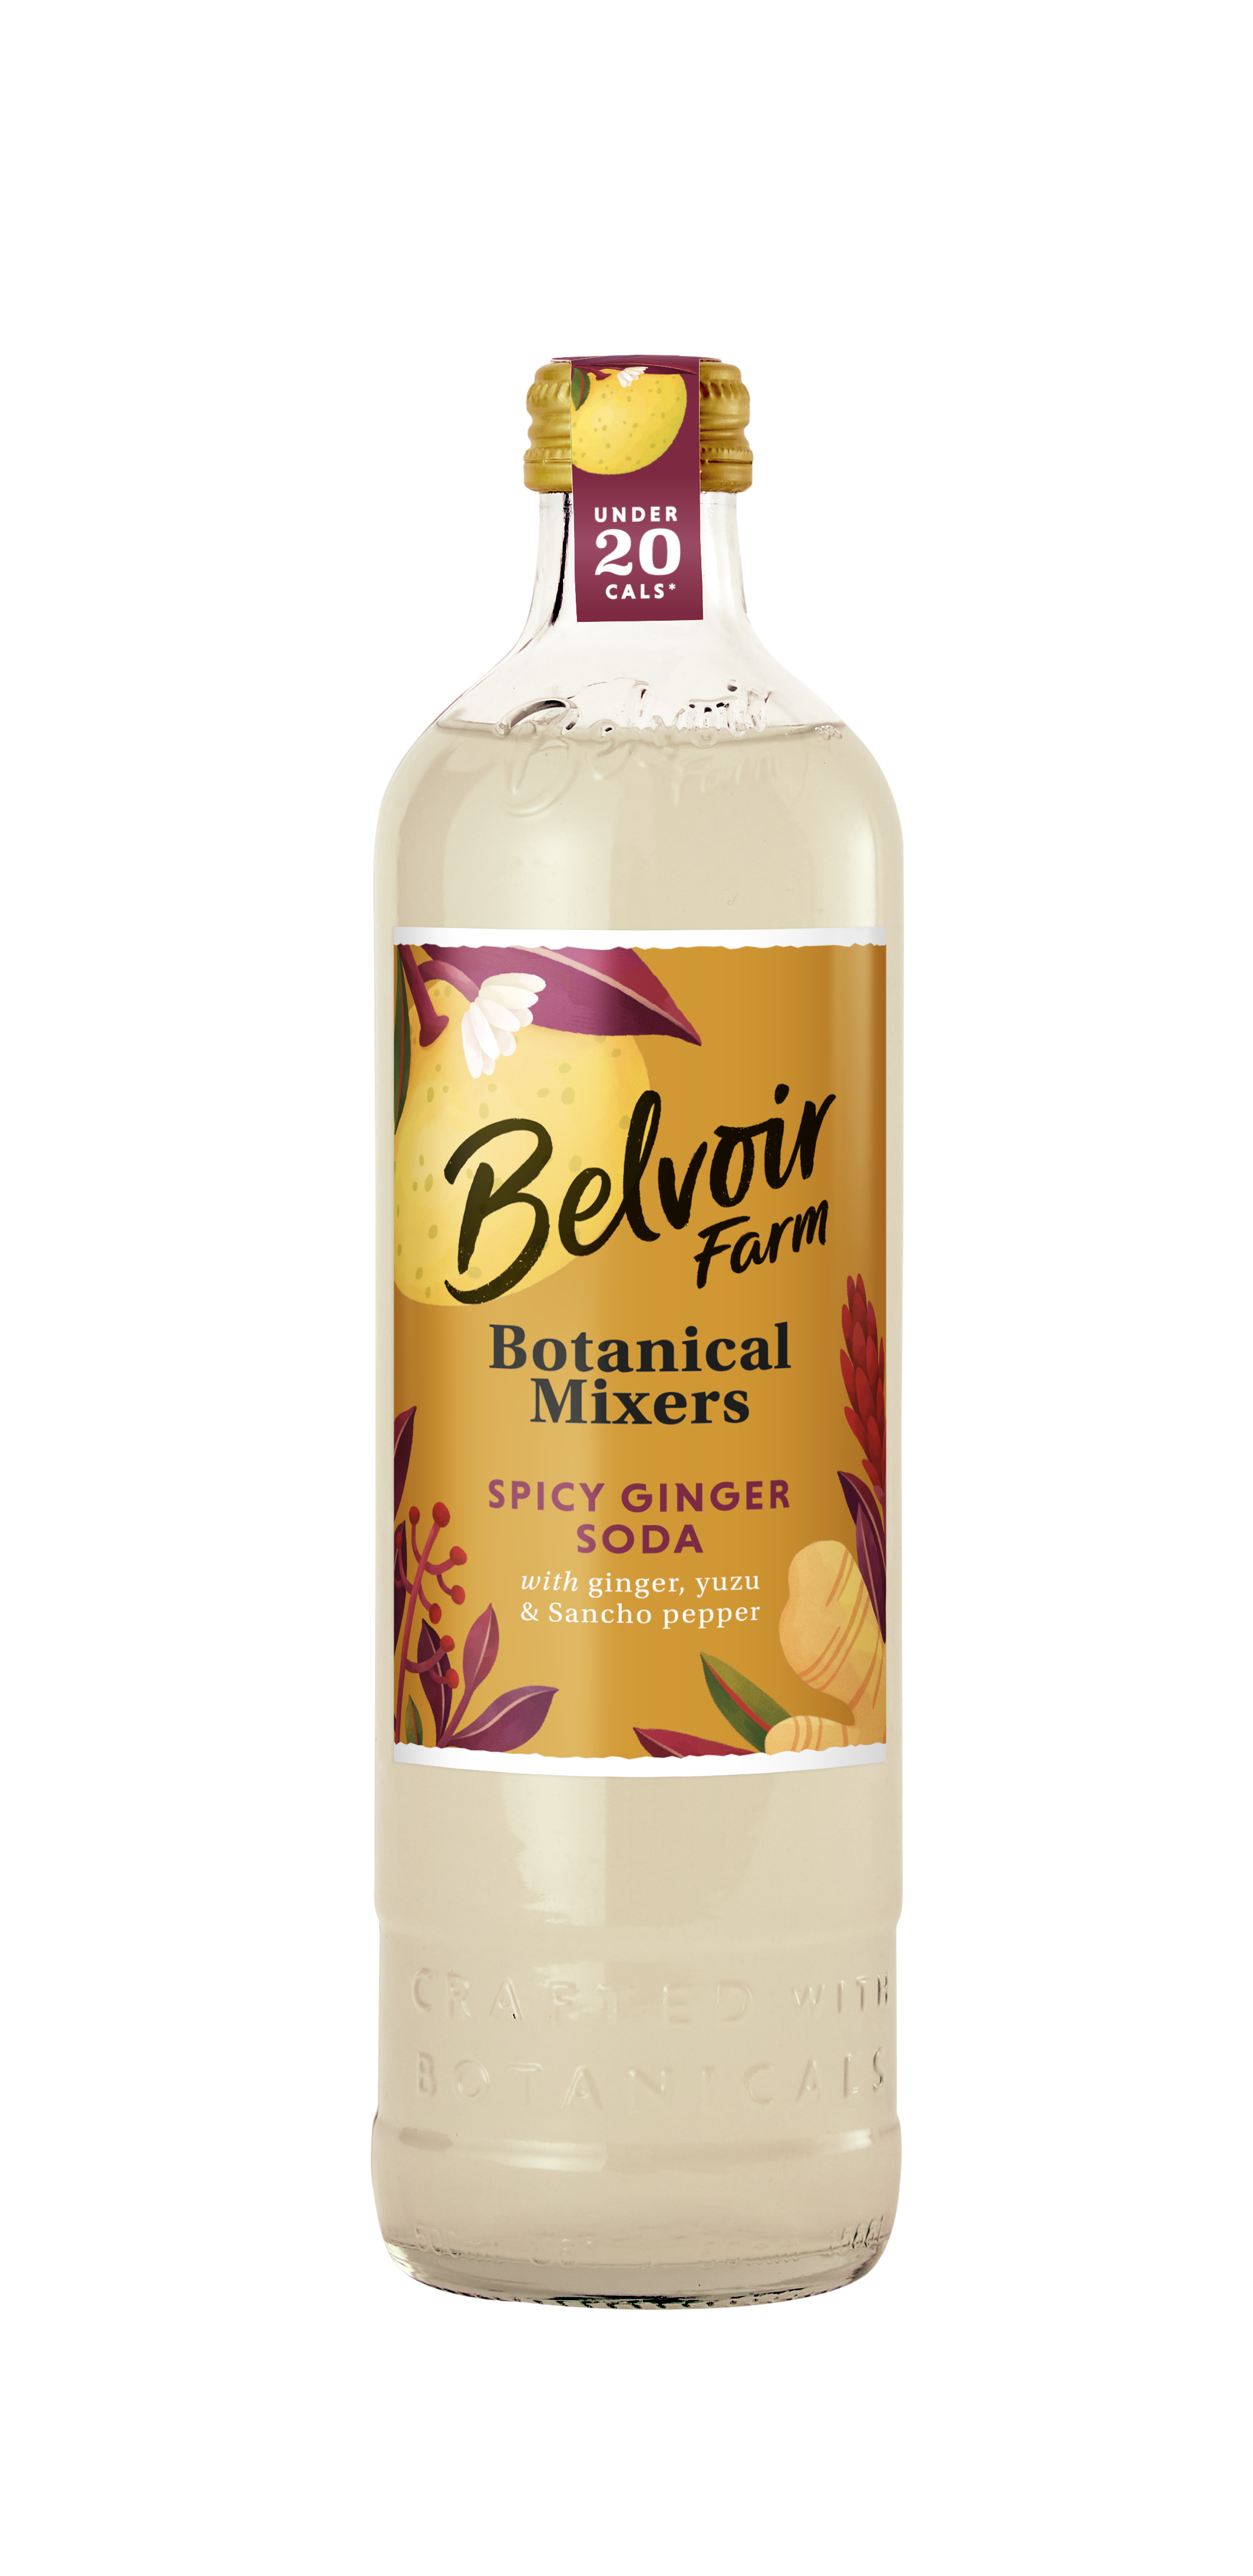 Belvoir Botanical Mixers Spicy Ginger Soda